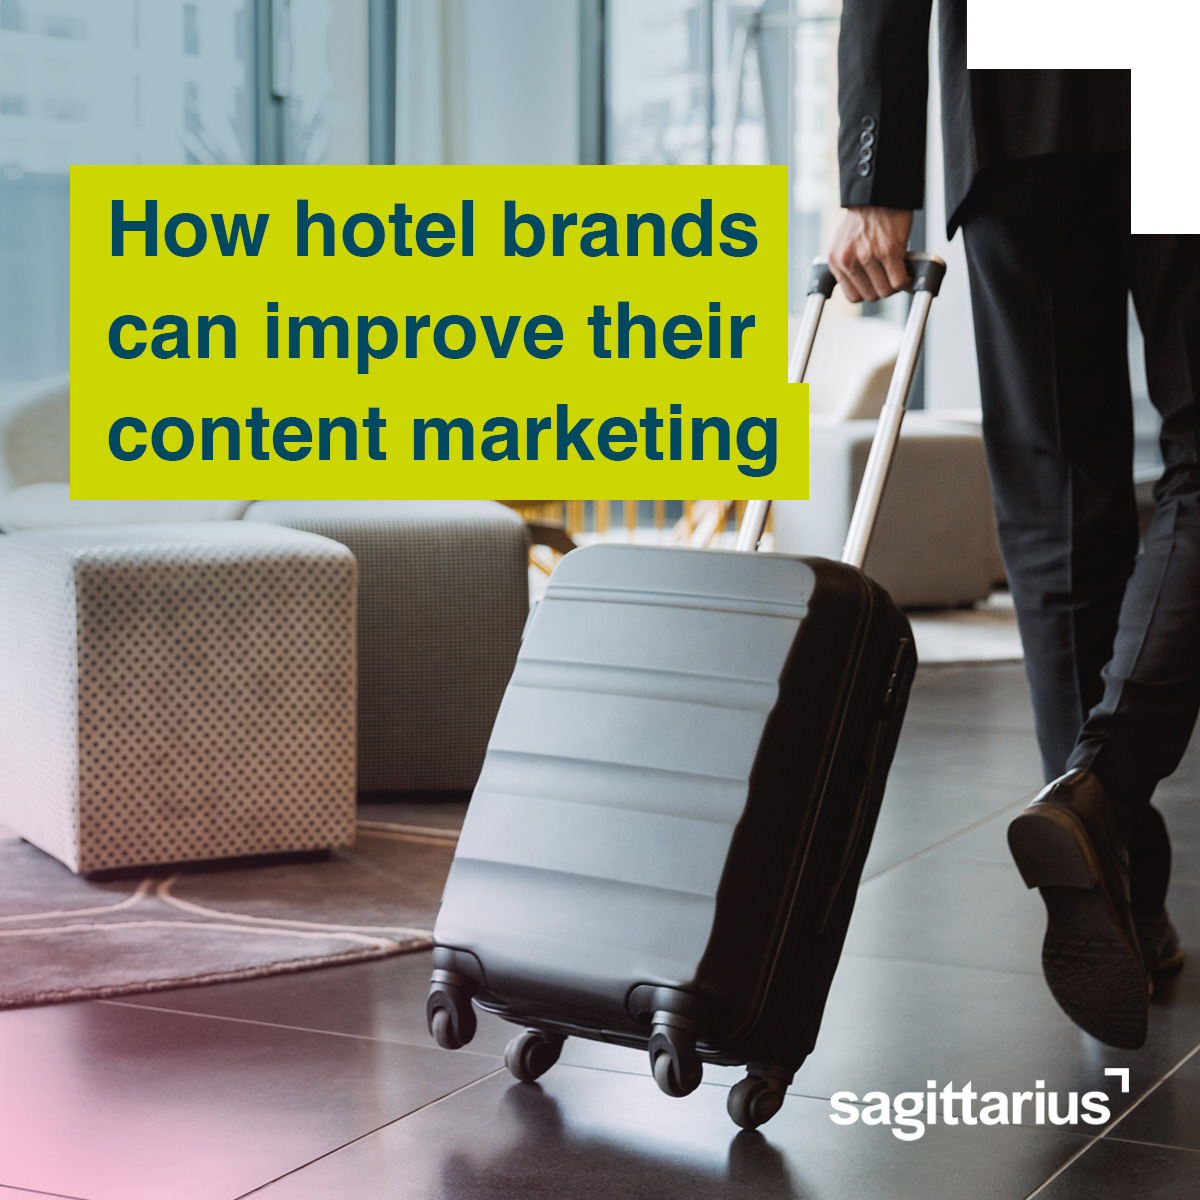 With customers making as many as 38 website visits before making a booking, hotels need to have a solid content marketing strategy to spark travellers' inspiration to book. Learn how: eu1.hubs.ly/H097-g90
#TravelMarketing #HotelMarketing #ContentMarketing #DigitalStrategy